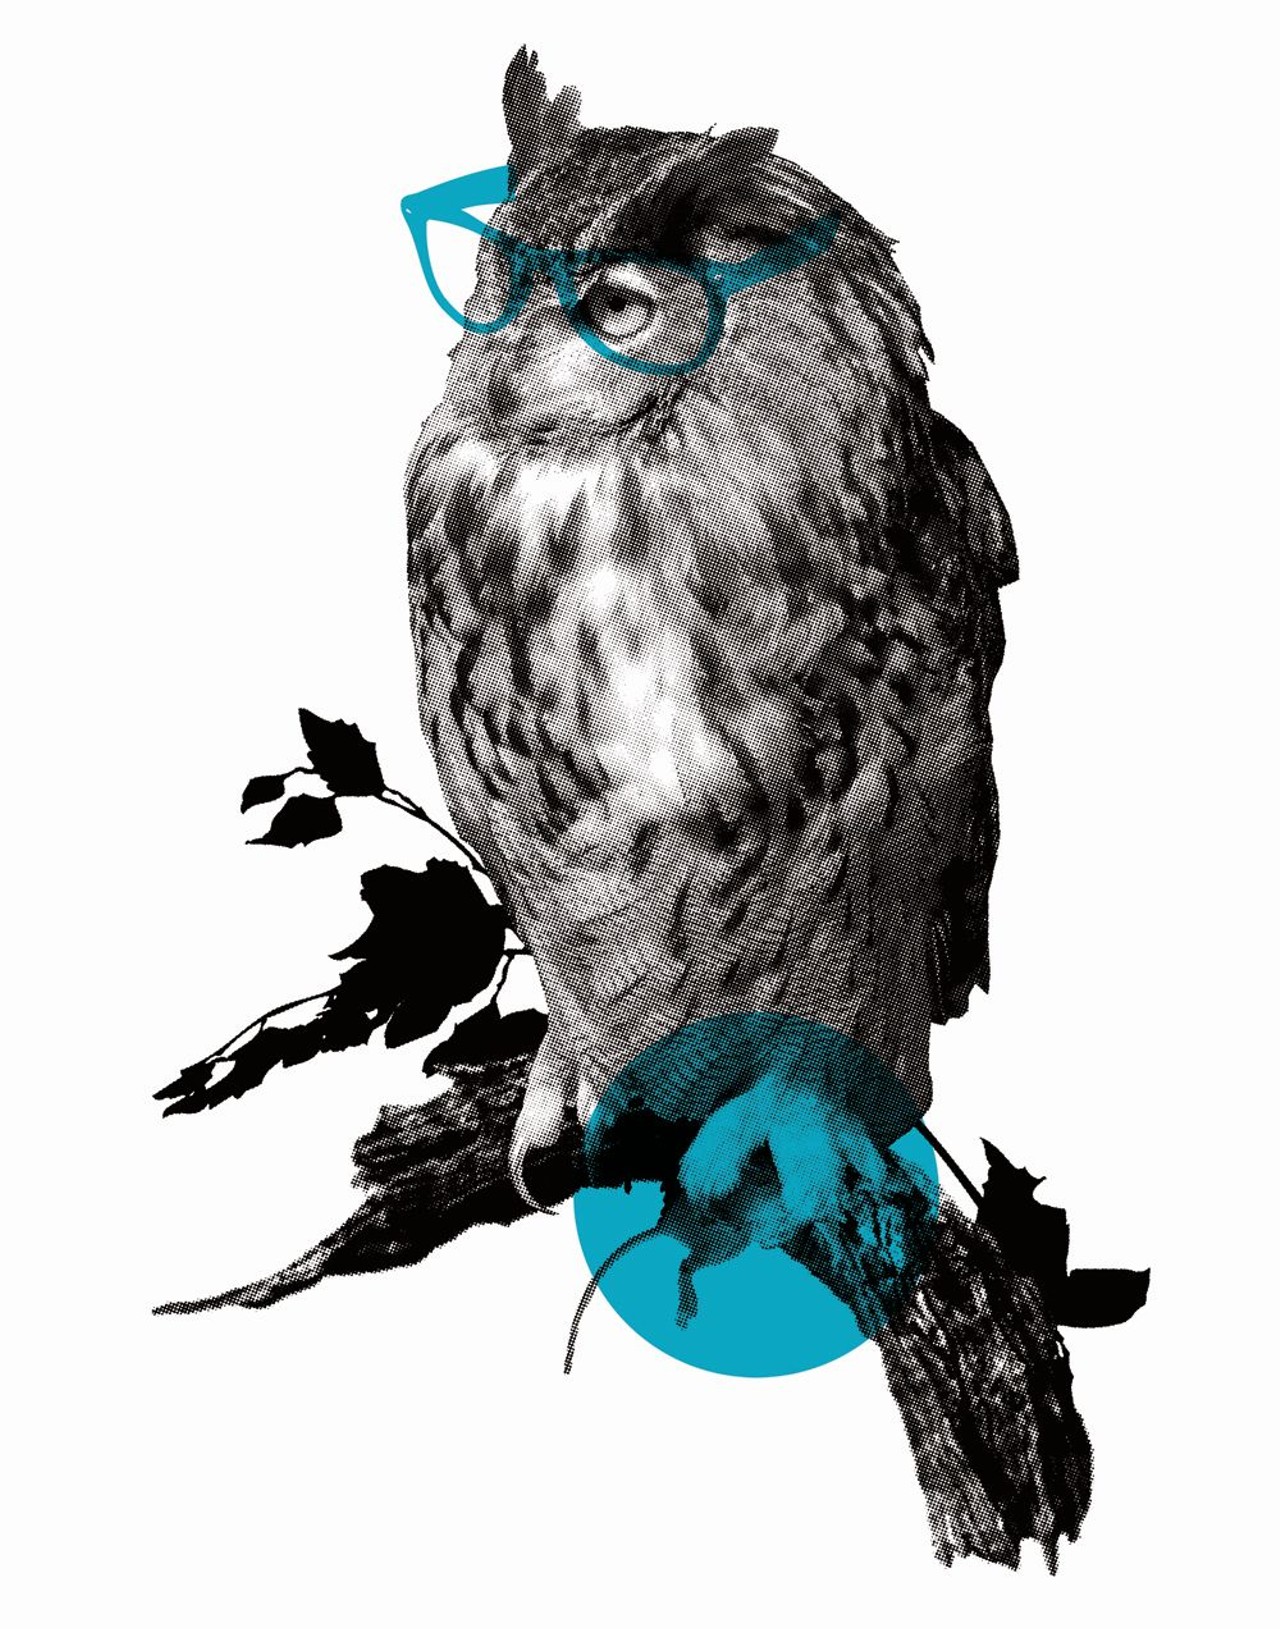 Hipster Owl by Sarah Zagcki  click here to read the studio visit